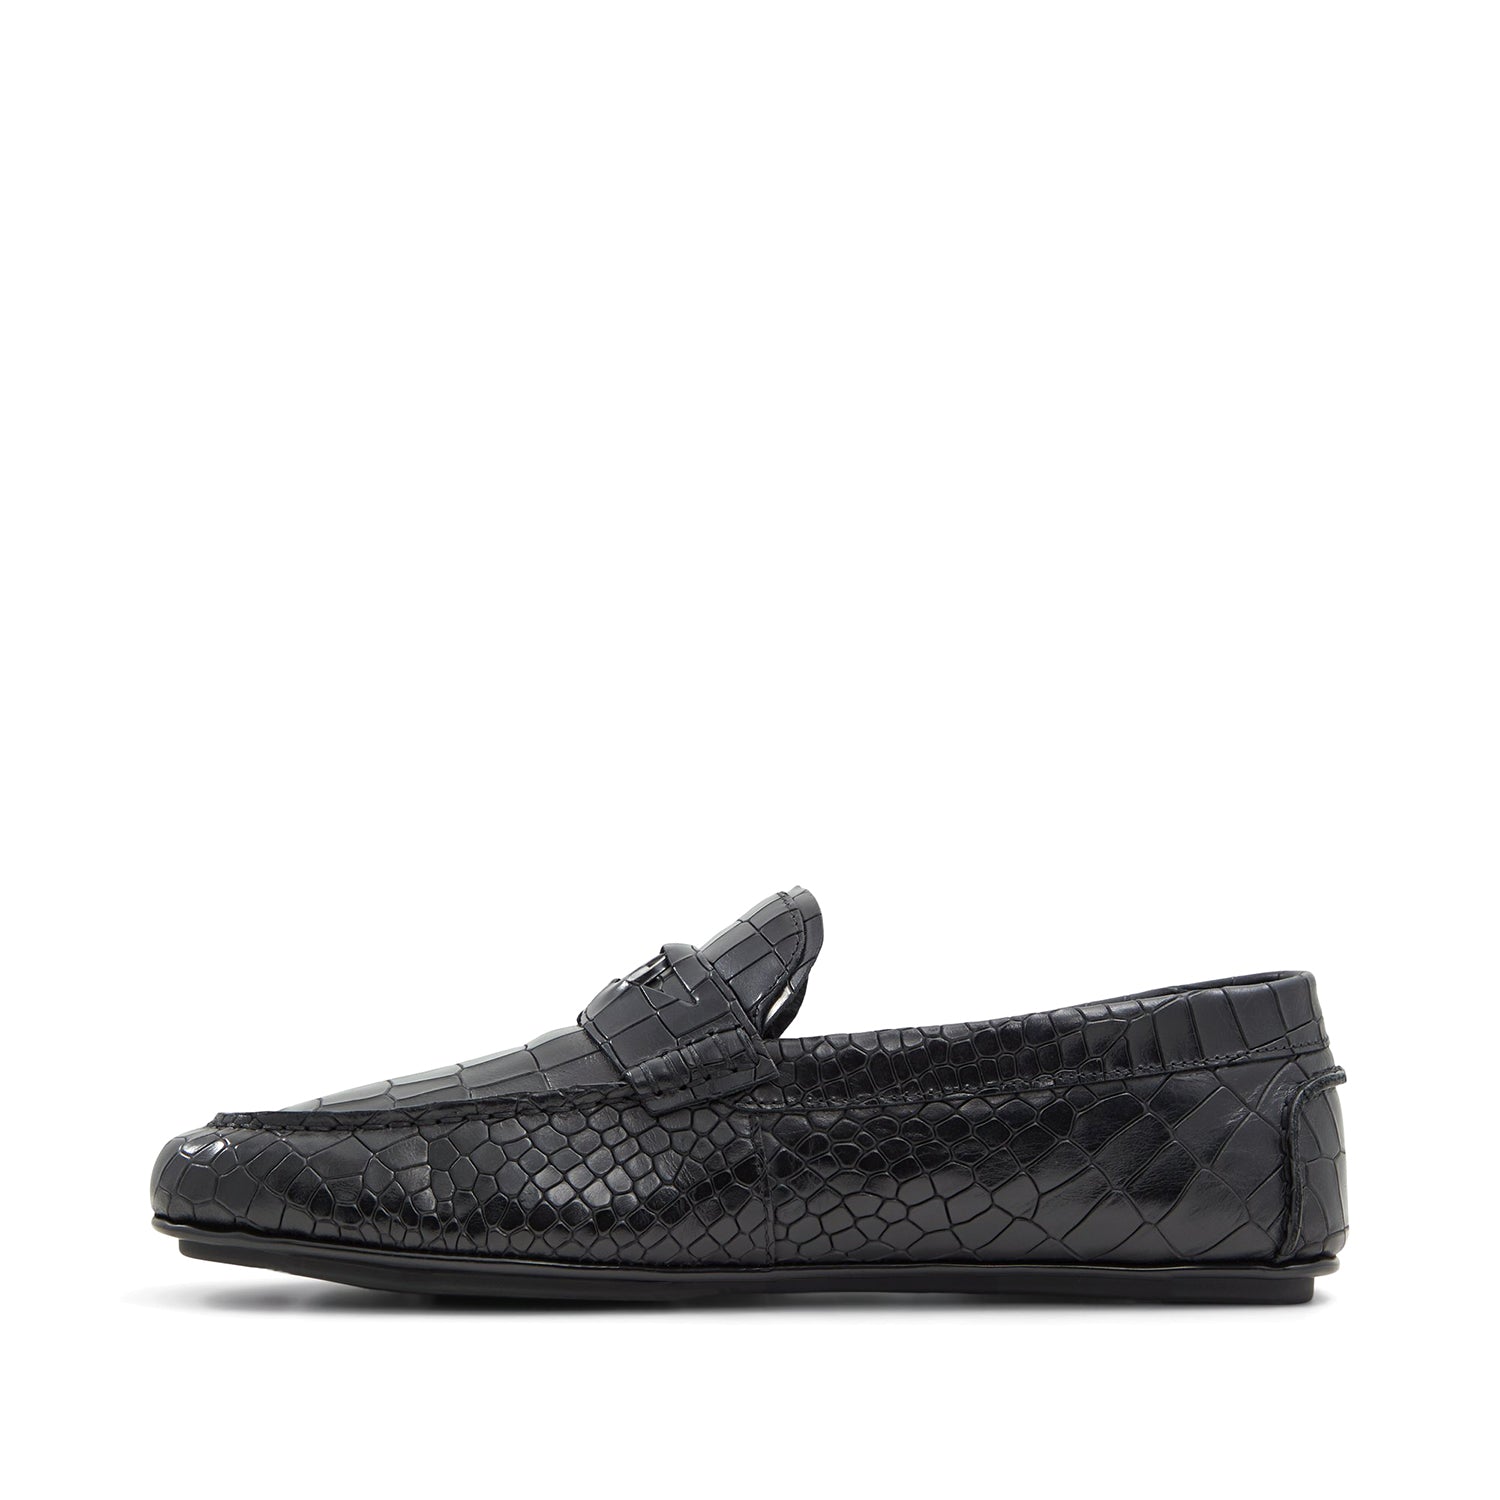 Croco X Pythan Textured Leather Loafers